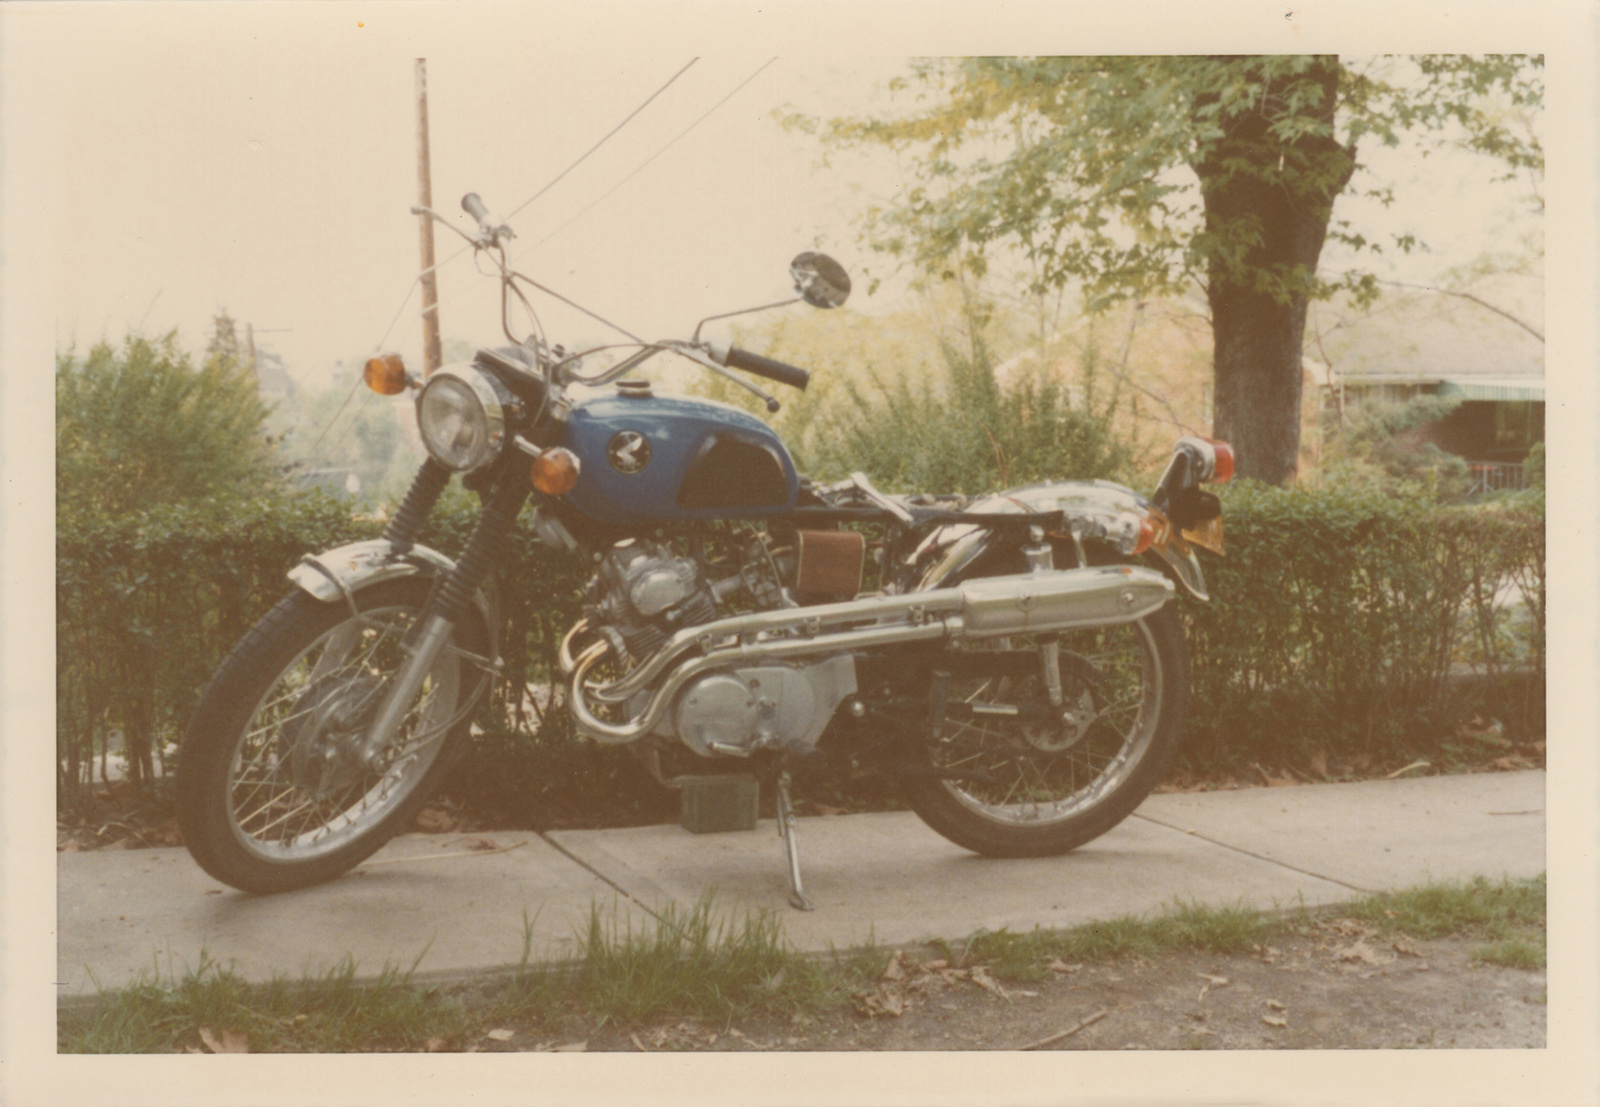 Bill's first bike – purchased in the late 1960's